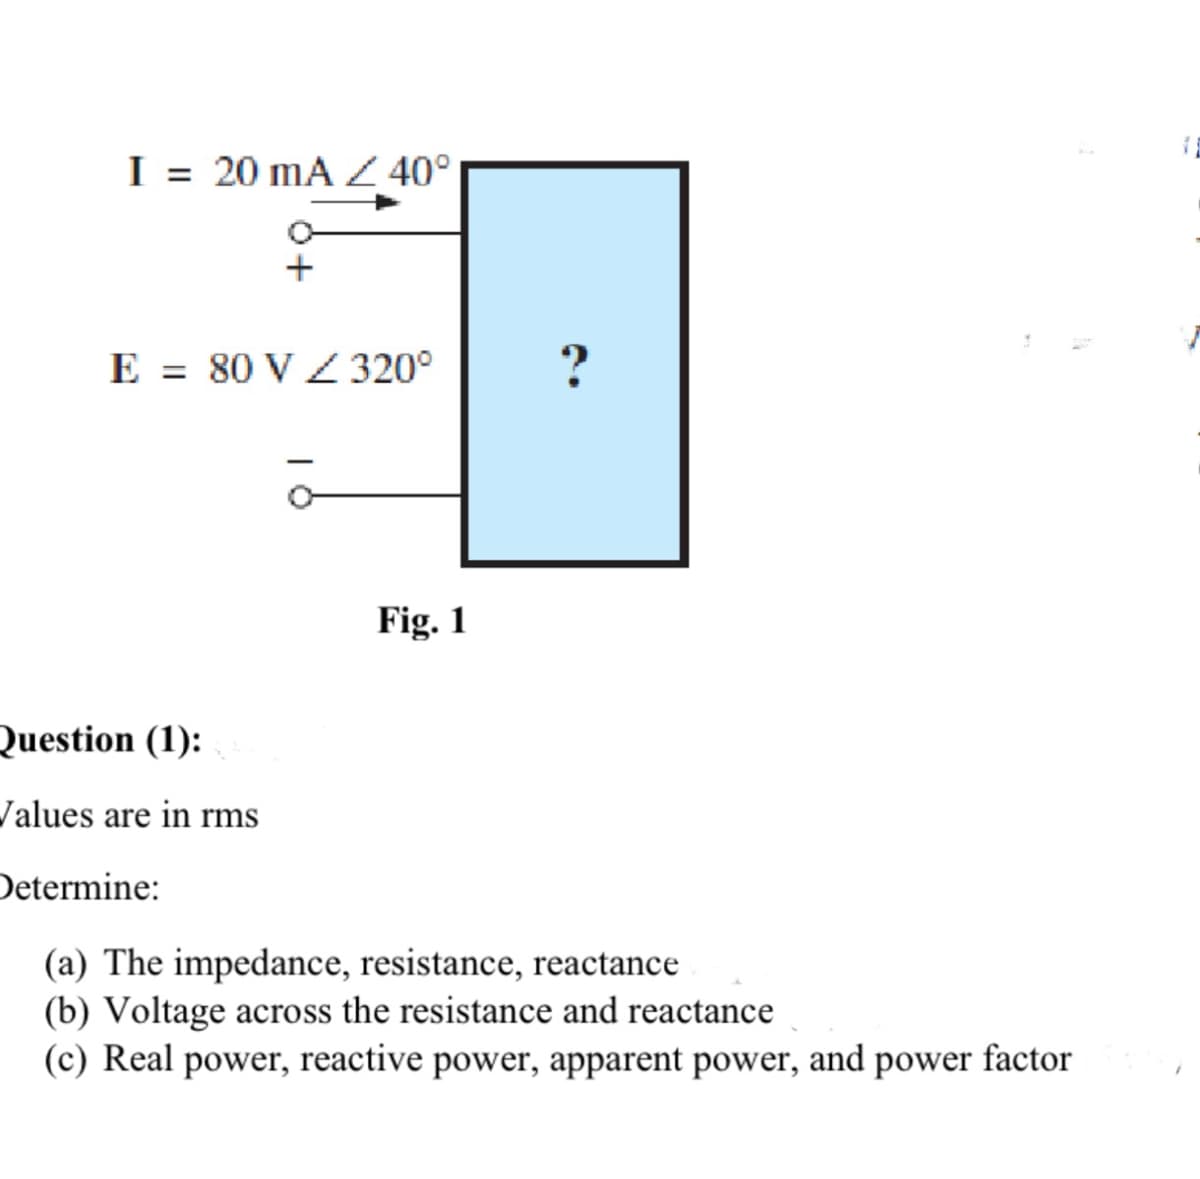 I= 20 mA / 40°
+
E = 80 V / 320°
Fig. 1
?
Question (1):
Values are in rms
Determine:
(a) The impedance, resistance, reactance
(b) Voltage across the resistance and reactance
(c) Real power, reactive power, apparent power, and power factor
TE